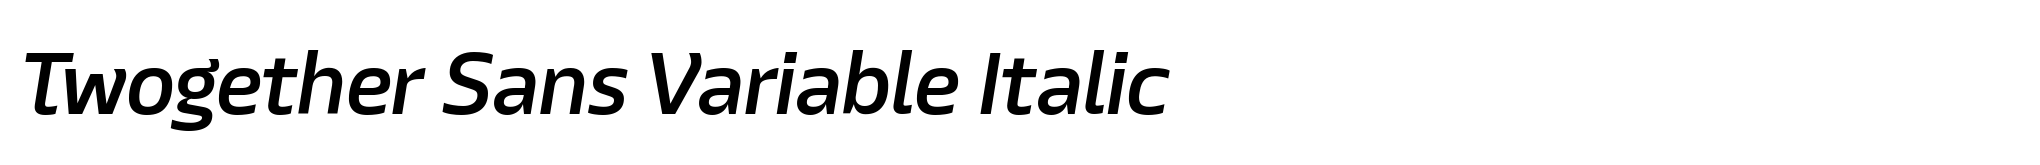 Twogether Sans Variable Italic image